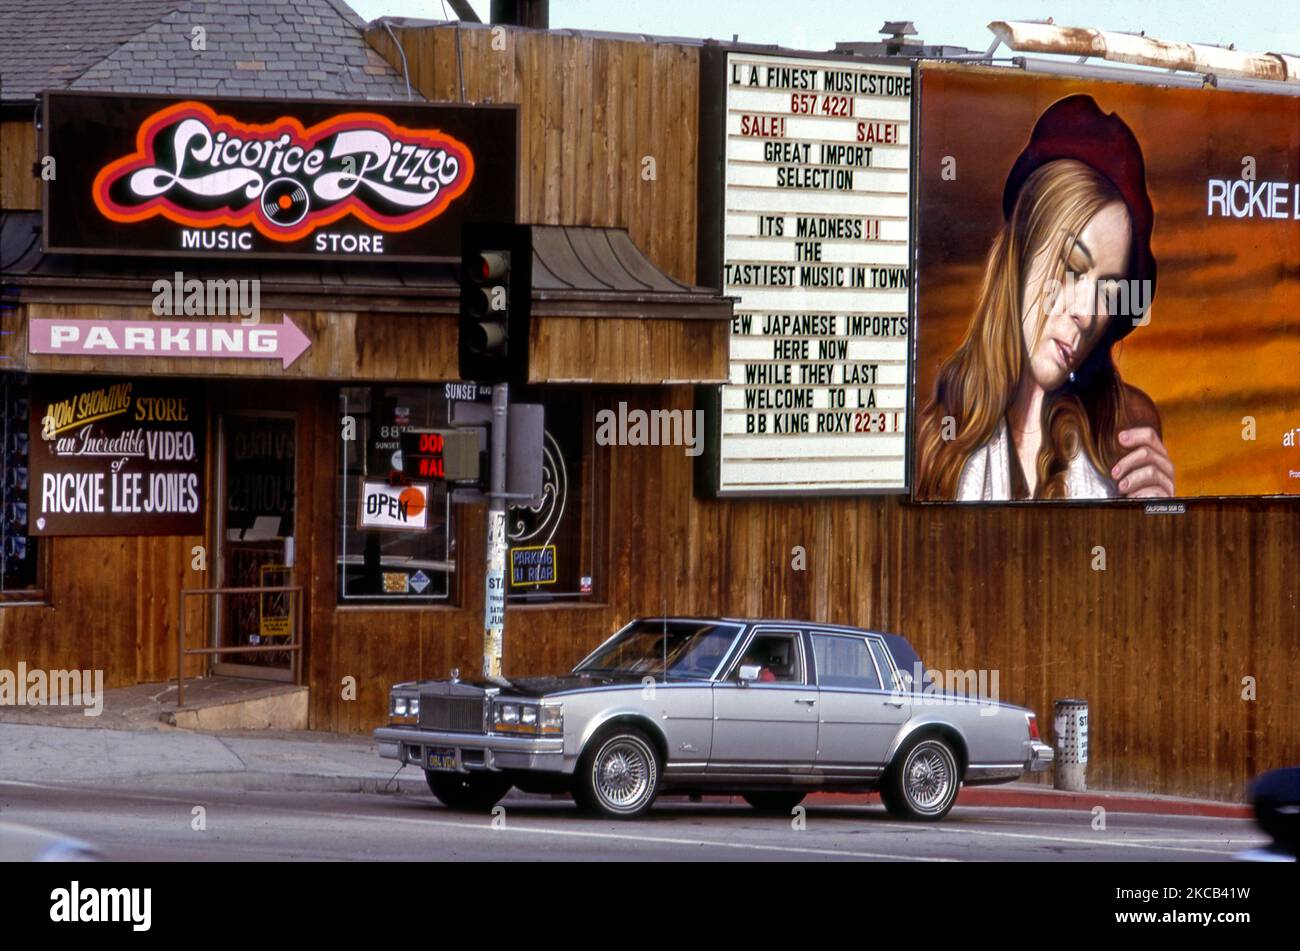 Licorice Pizza record store on the Sunset Strip with billboard and signs promoting Rickie Lee Jones album release in 1979 Stock Photo